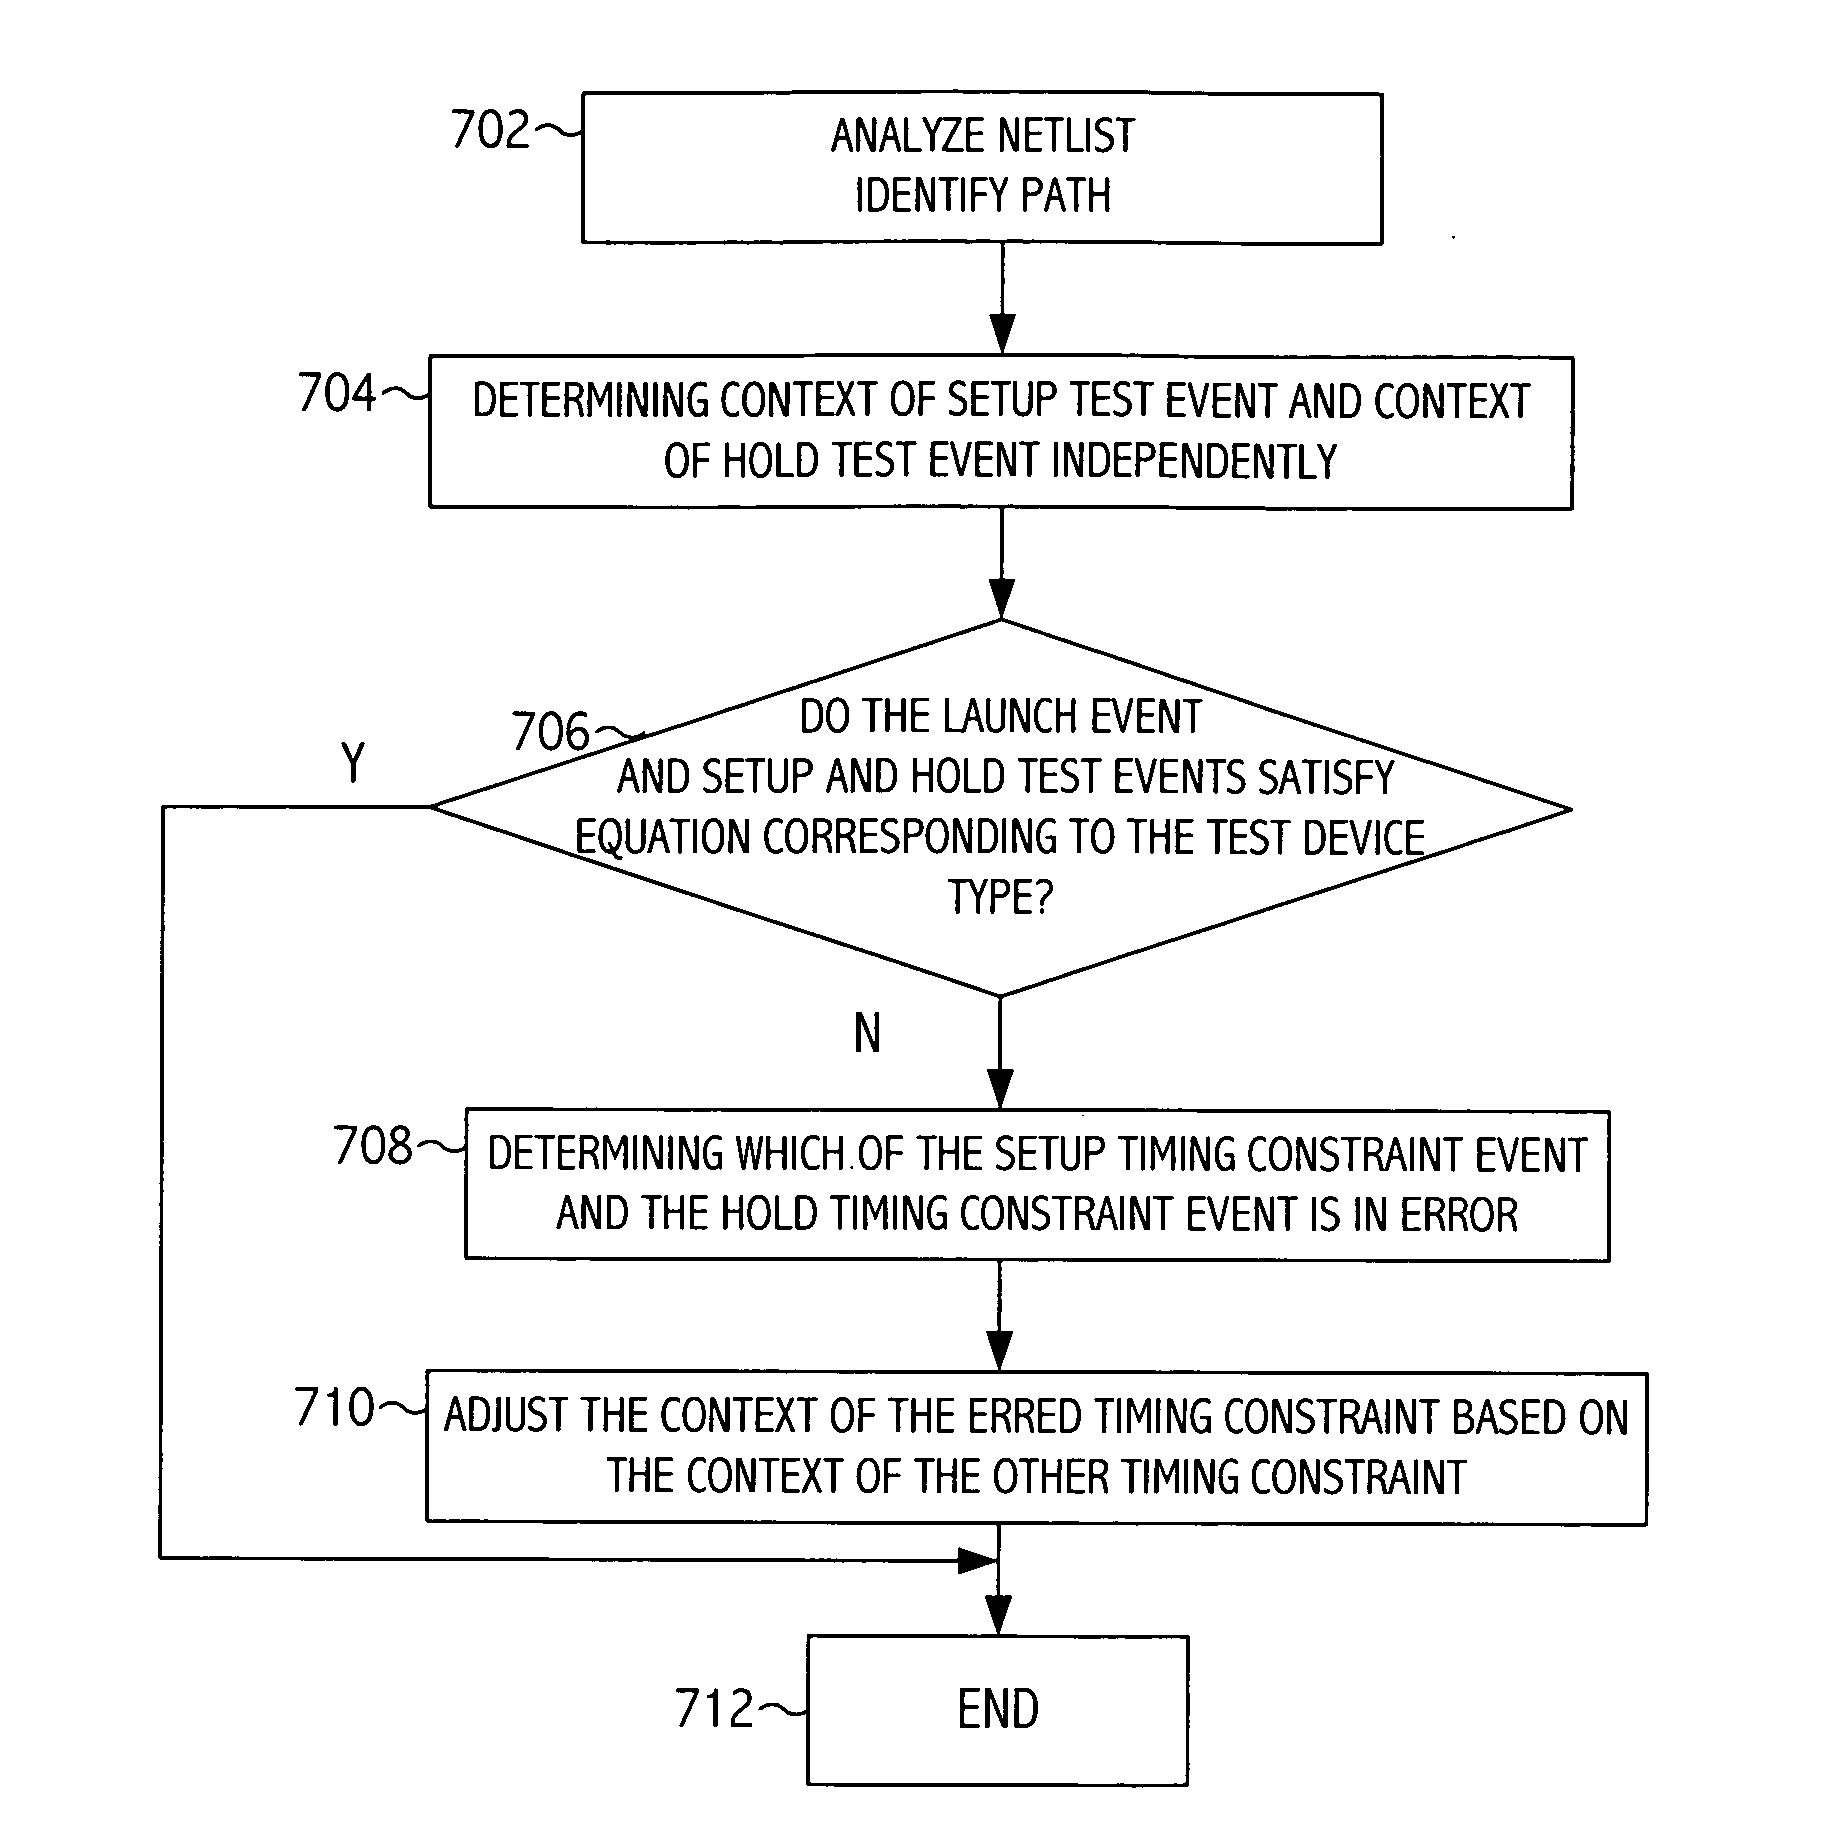 Application of consistent cycle context for related setup and hold tests for static timing analysis